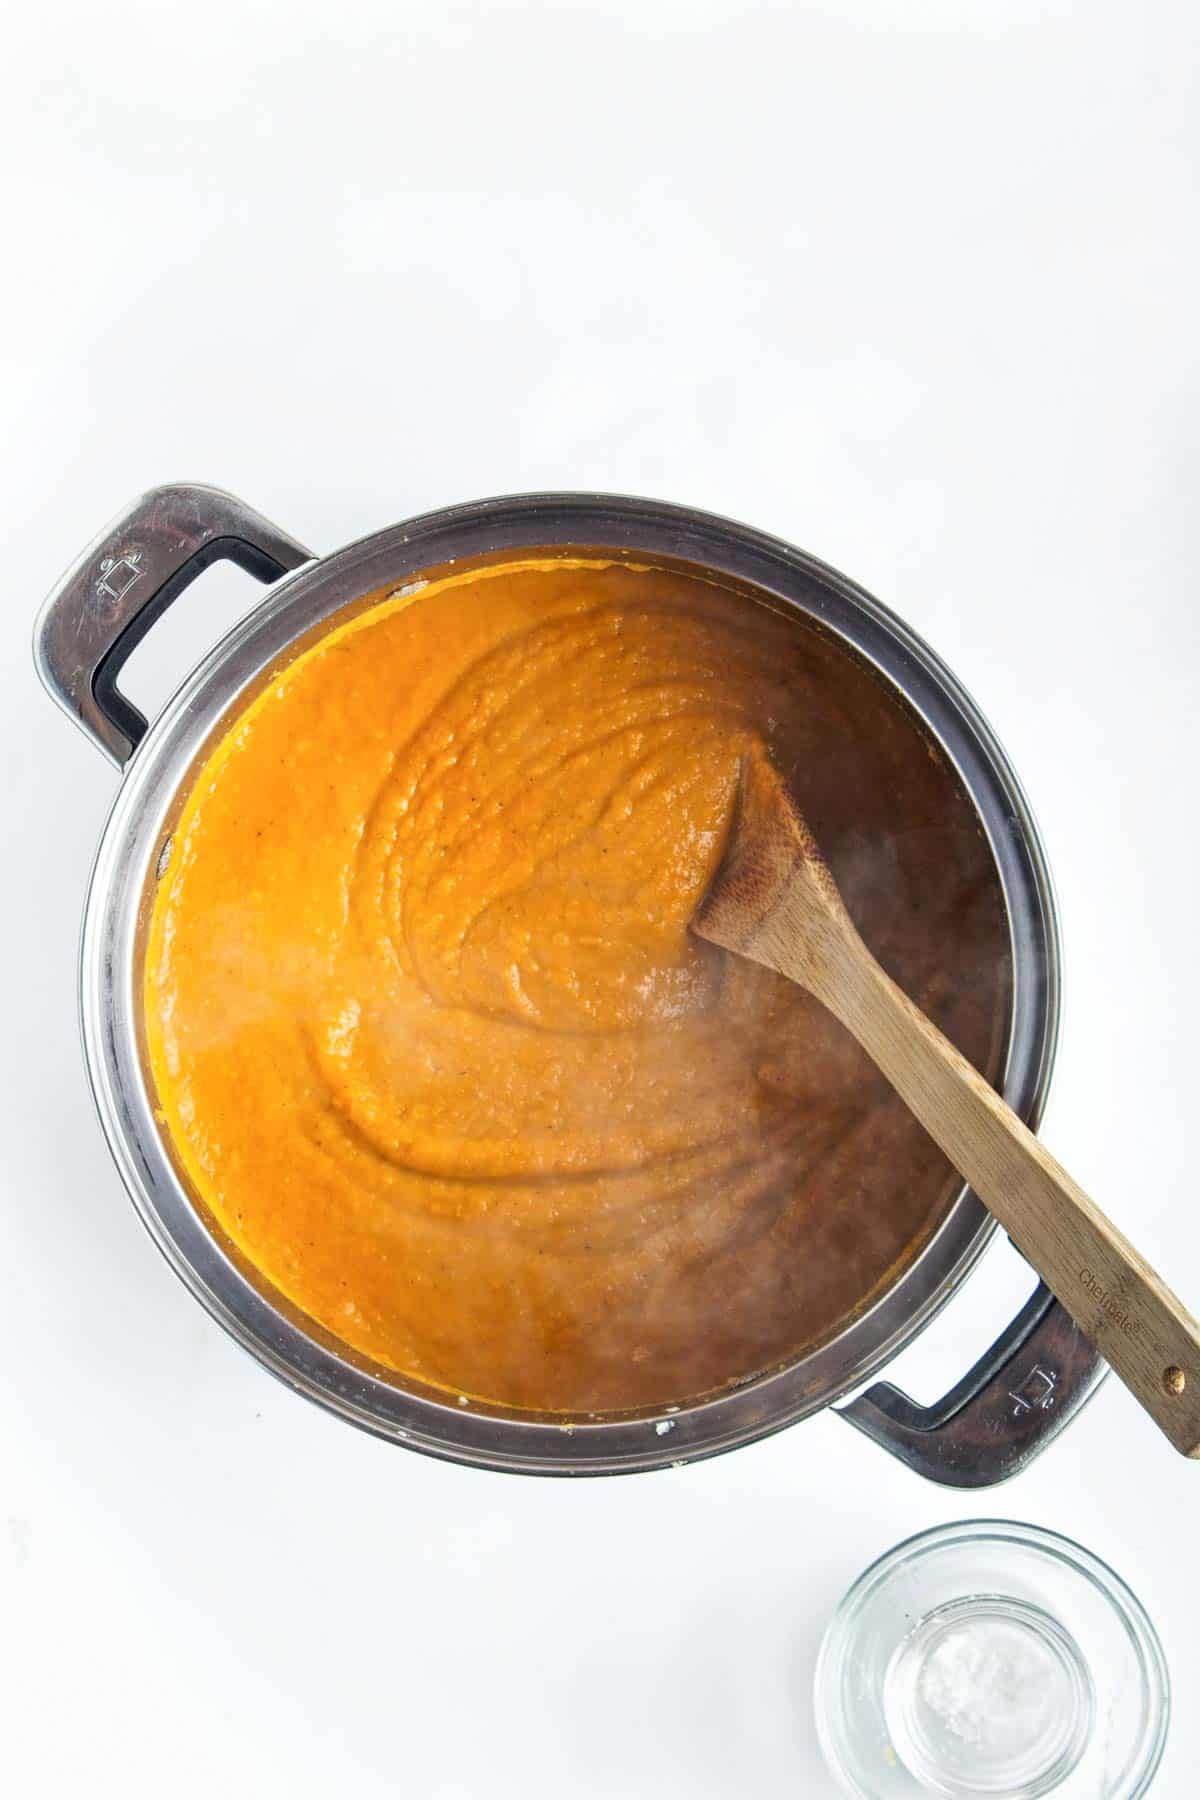 Pureed sweet potato soup in a pot.